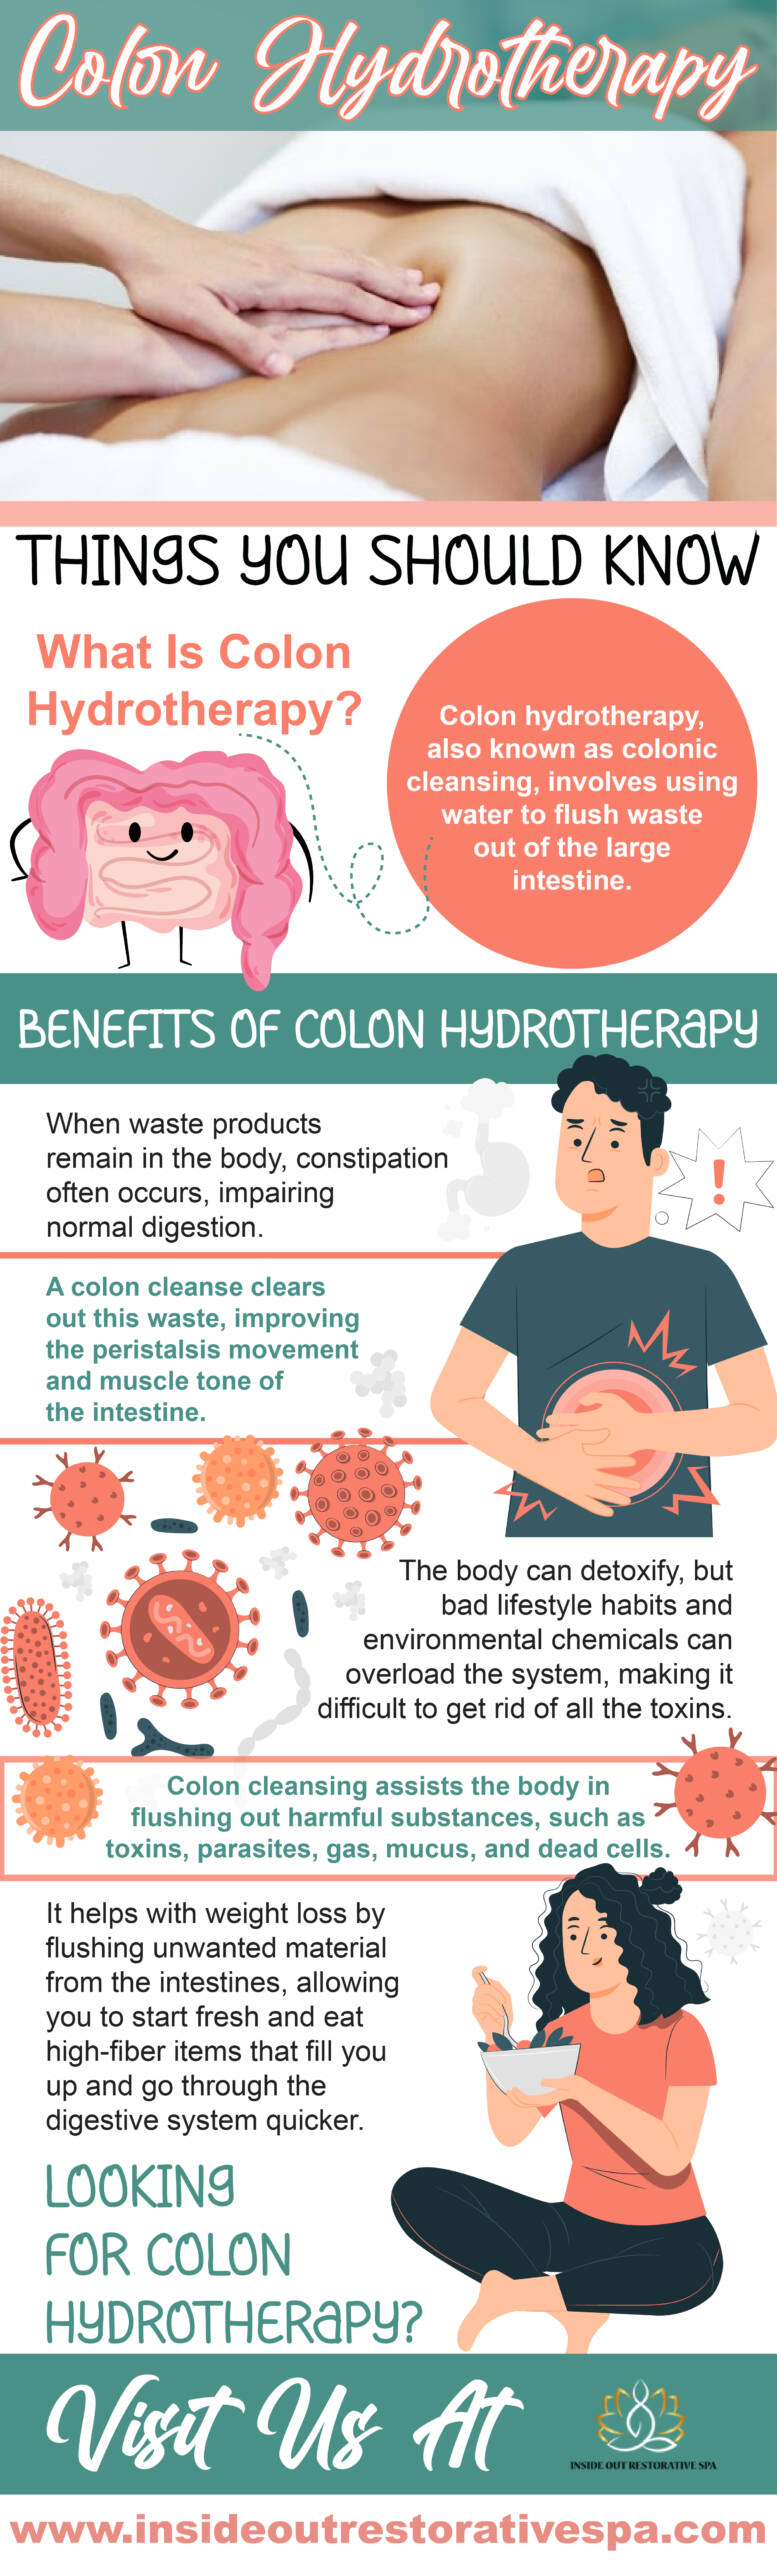 Colon Hydrotherapy - Things you should know - Infograph